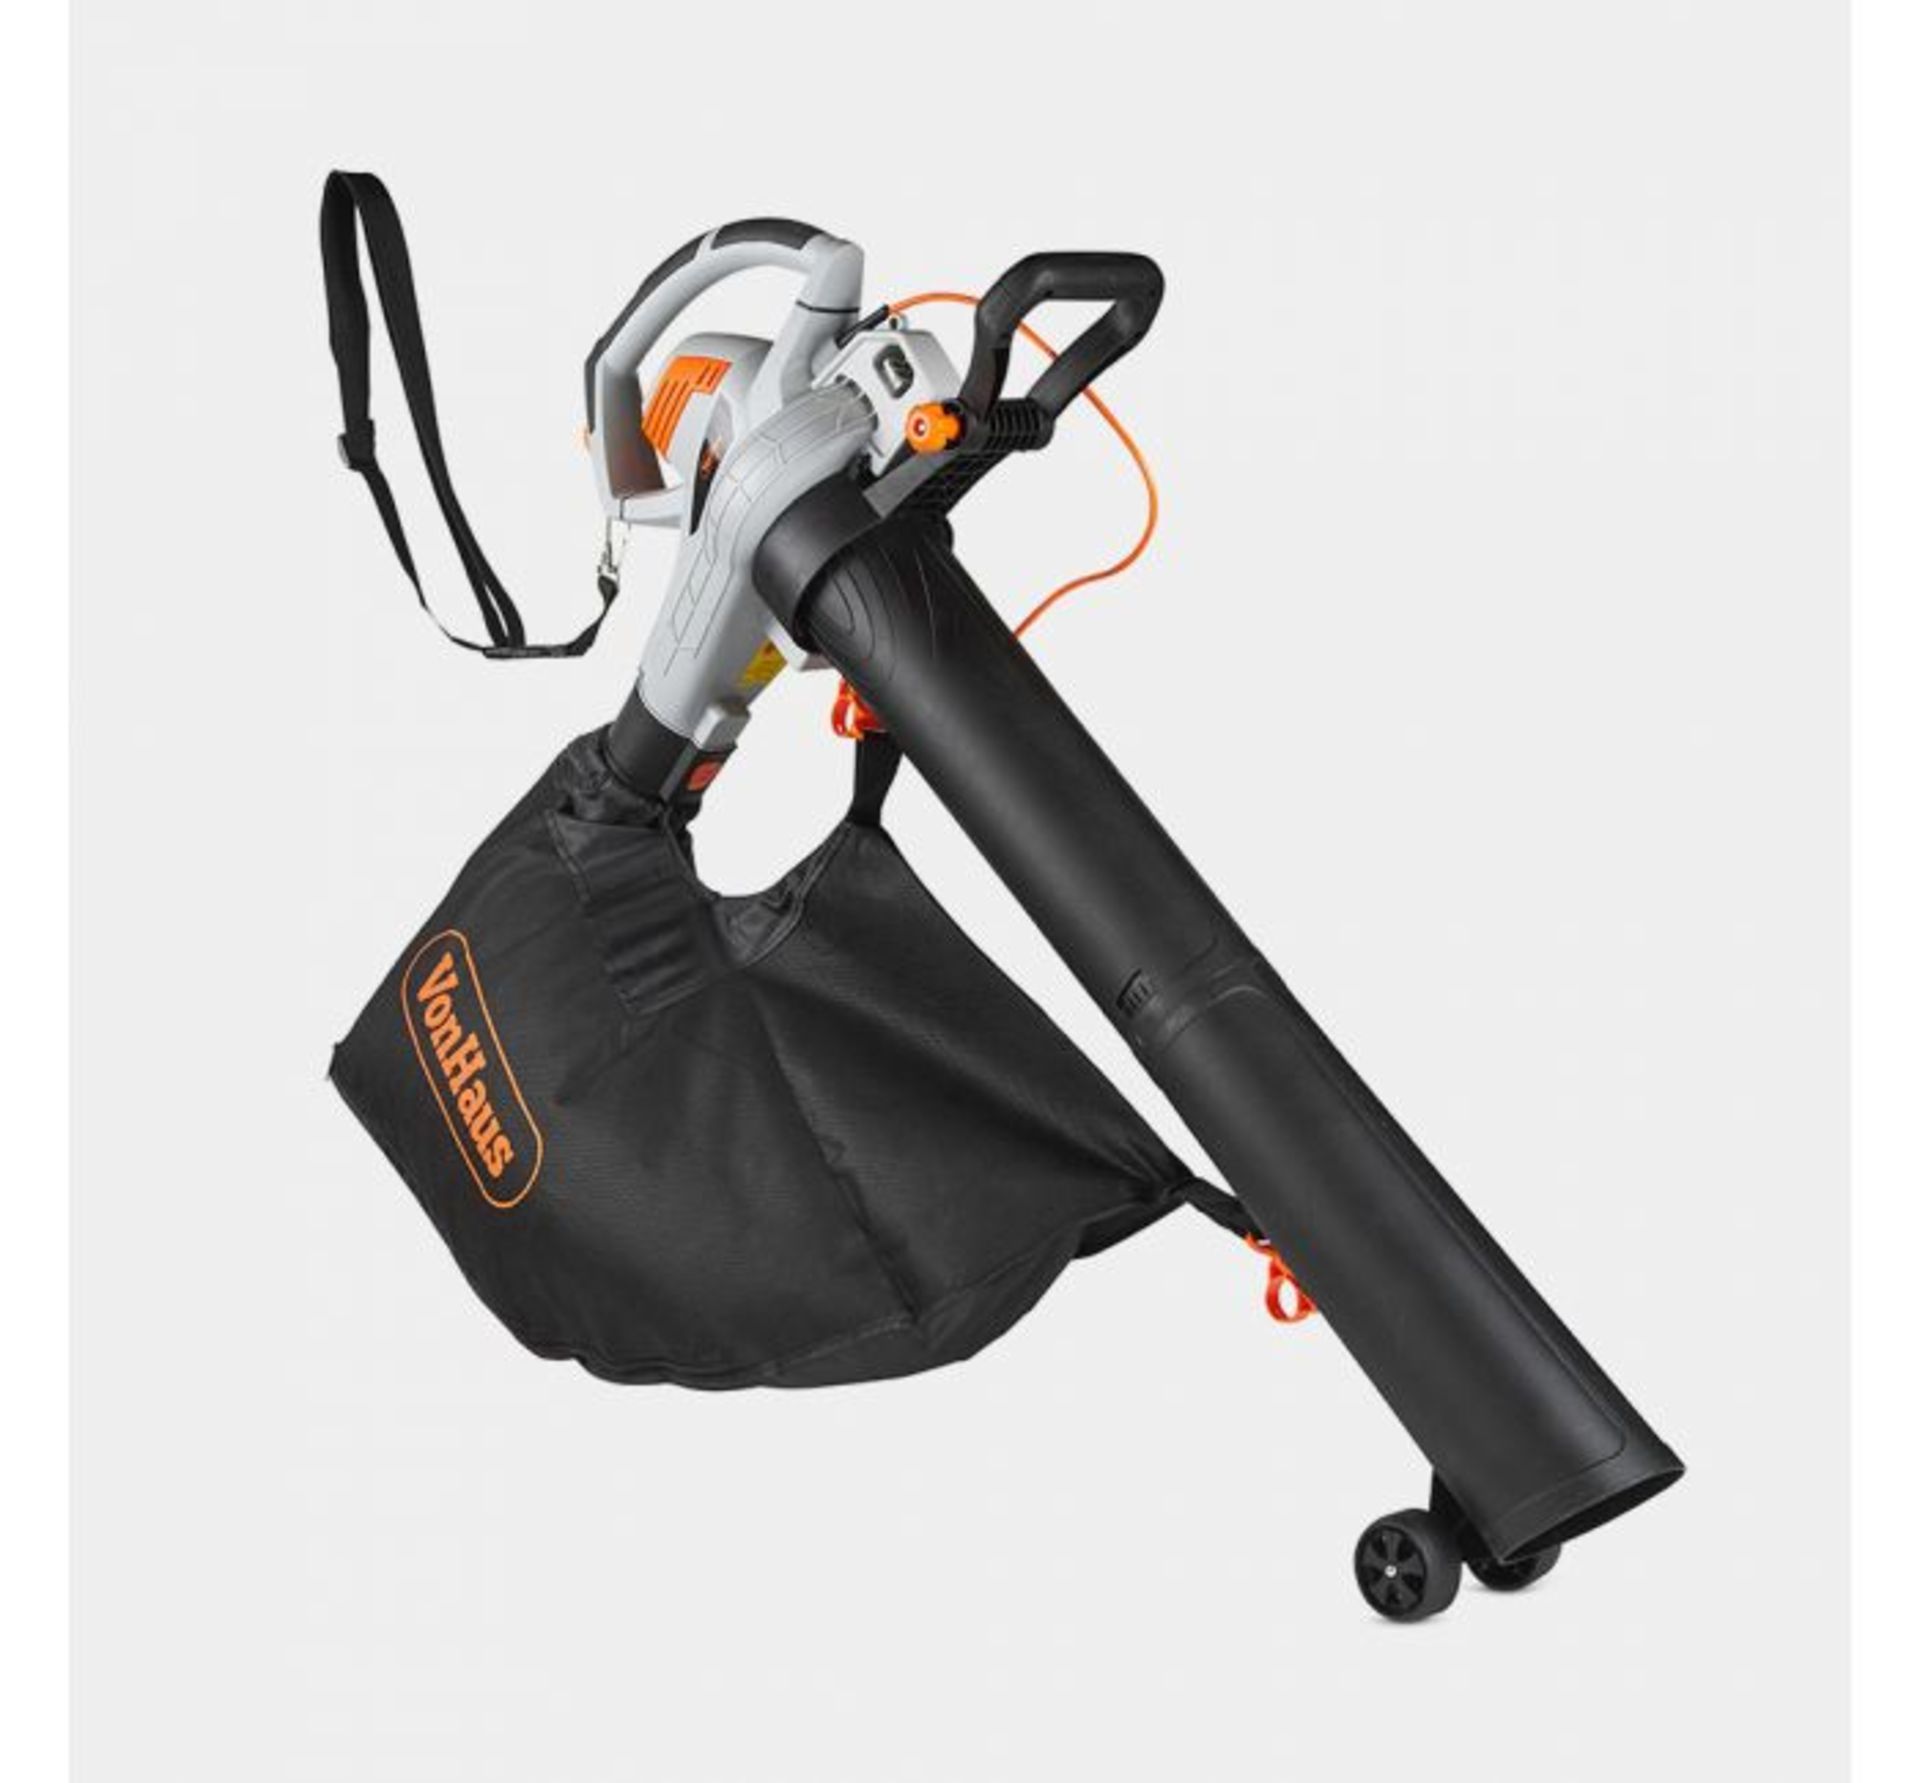 (JH6) 3000W 3-in-1 Leaf Blower Powerful 3000W motor blows, vacuums and mulches leaves into mat... - Image 2 of 3